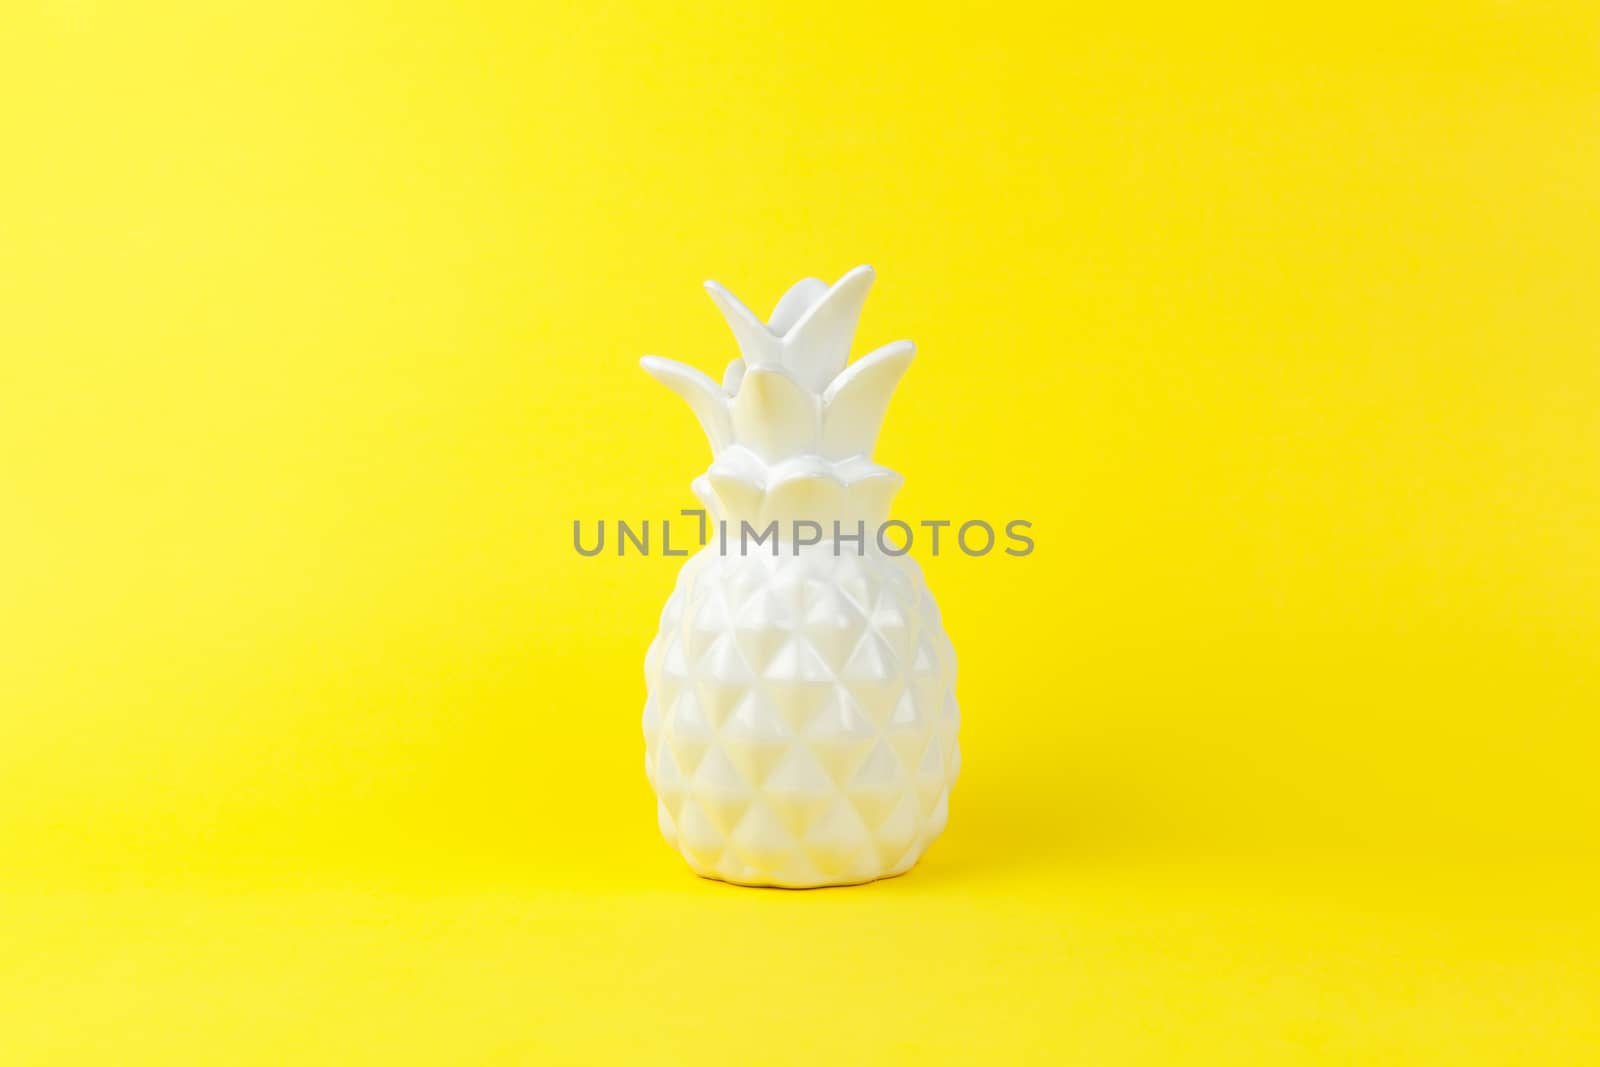 Trendy piece of interior white glossy ceramic pineapple on yellow paper background, copy space. Minimal style of decor concept. Horizontal. For lifestyle, interior blog, social media, poster by ALLUNEED